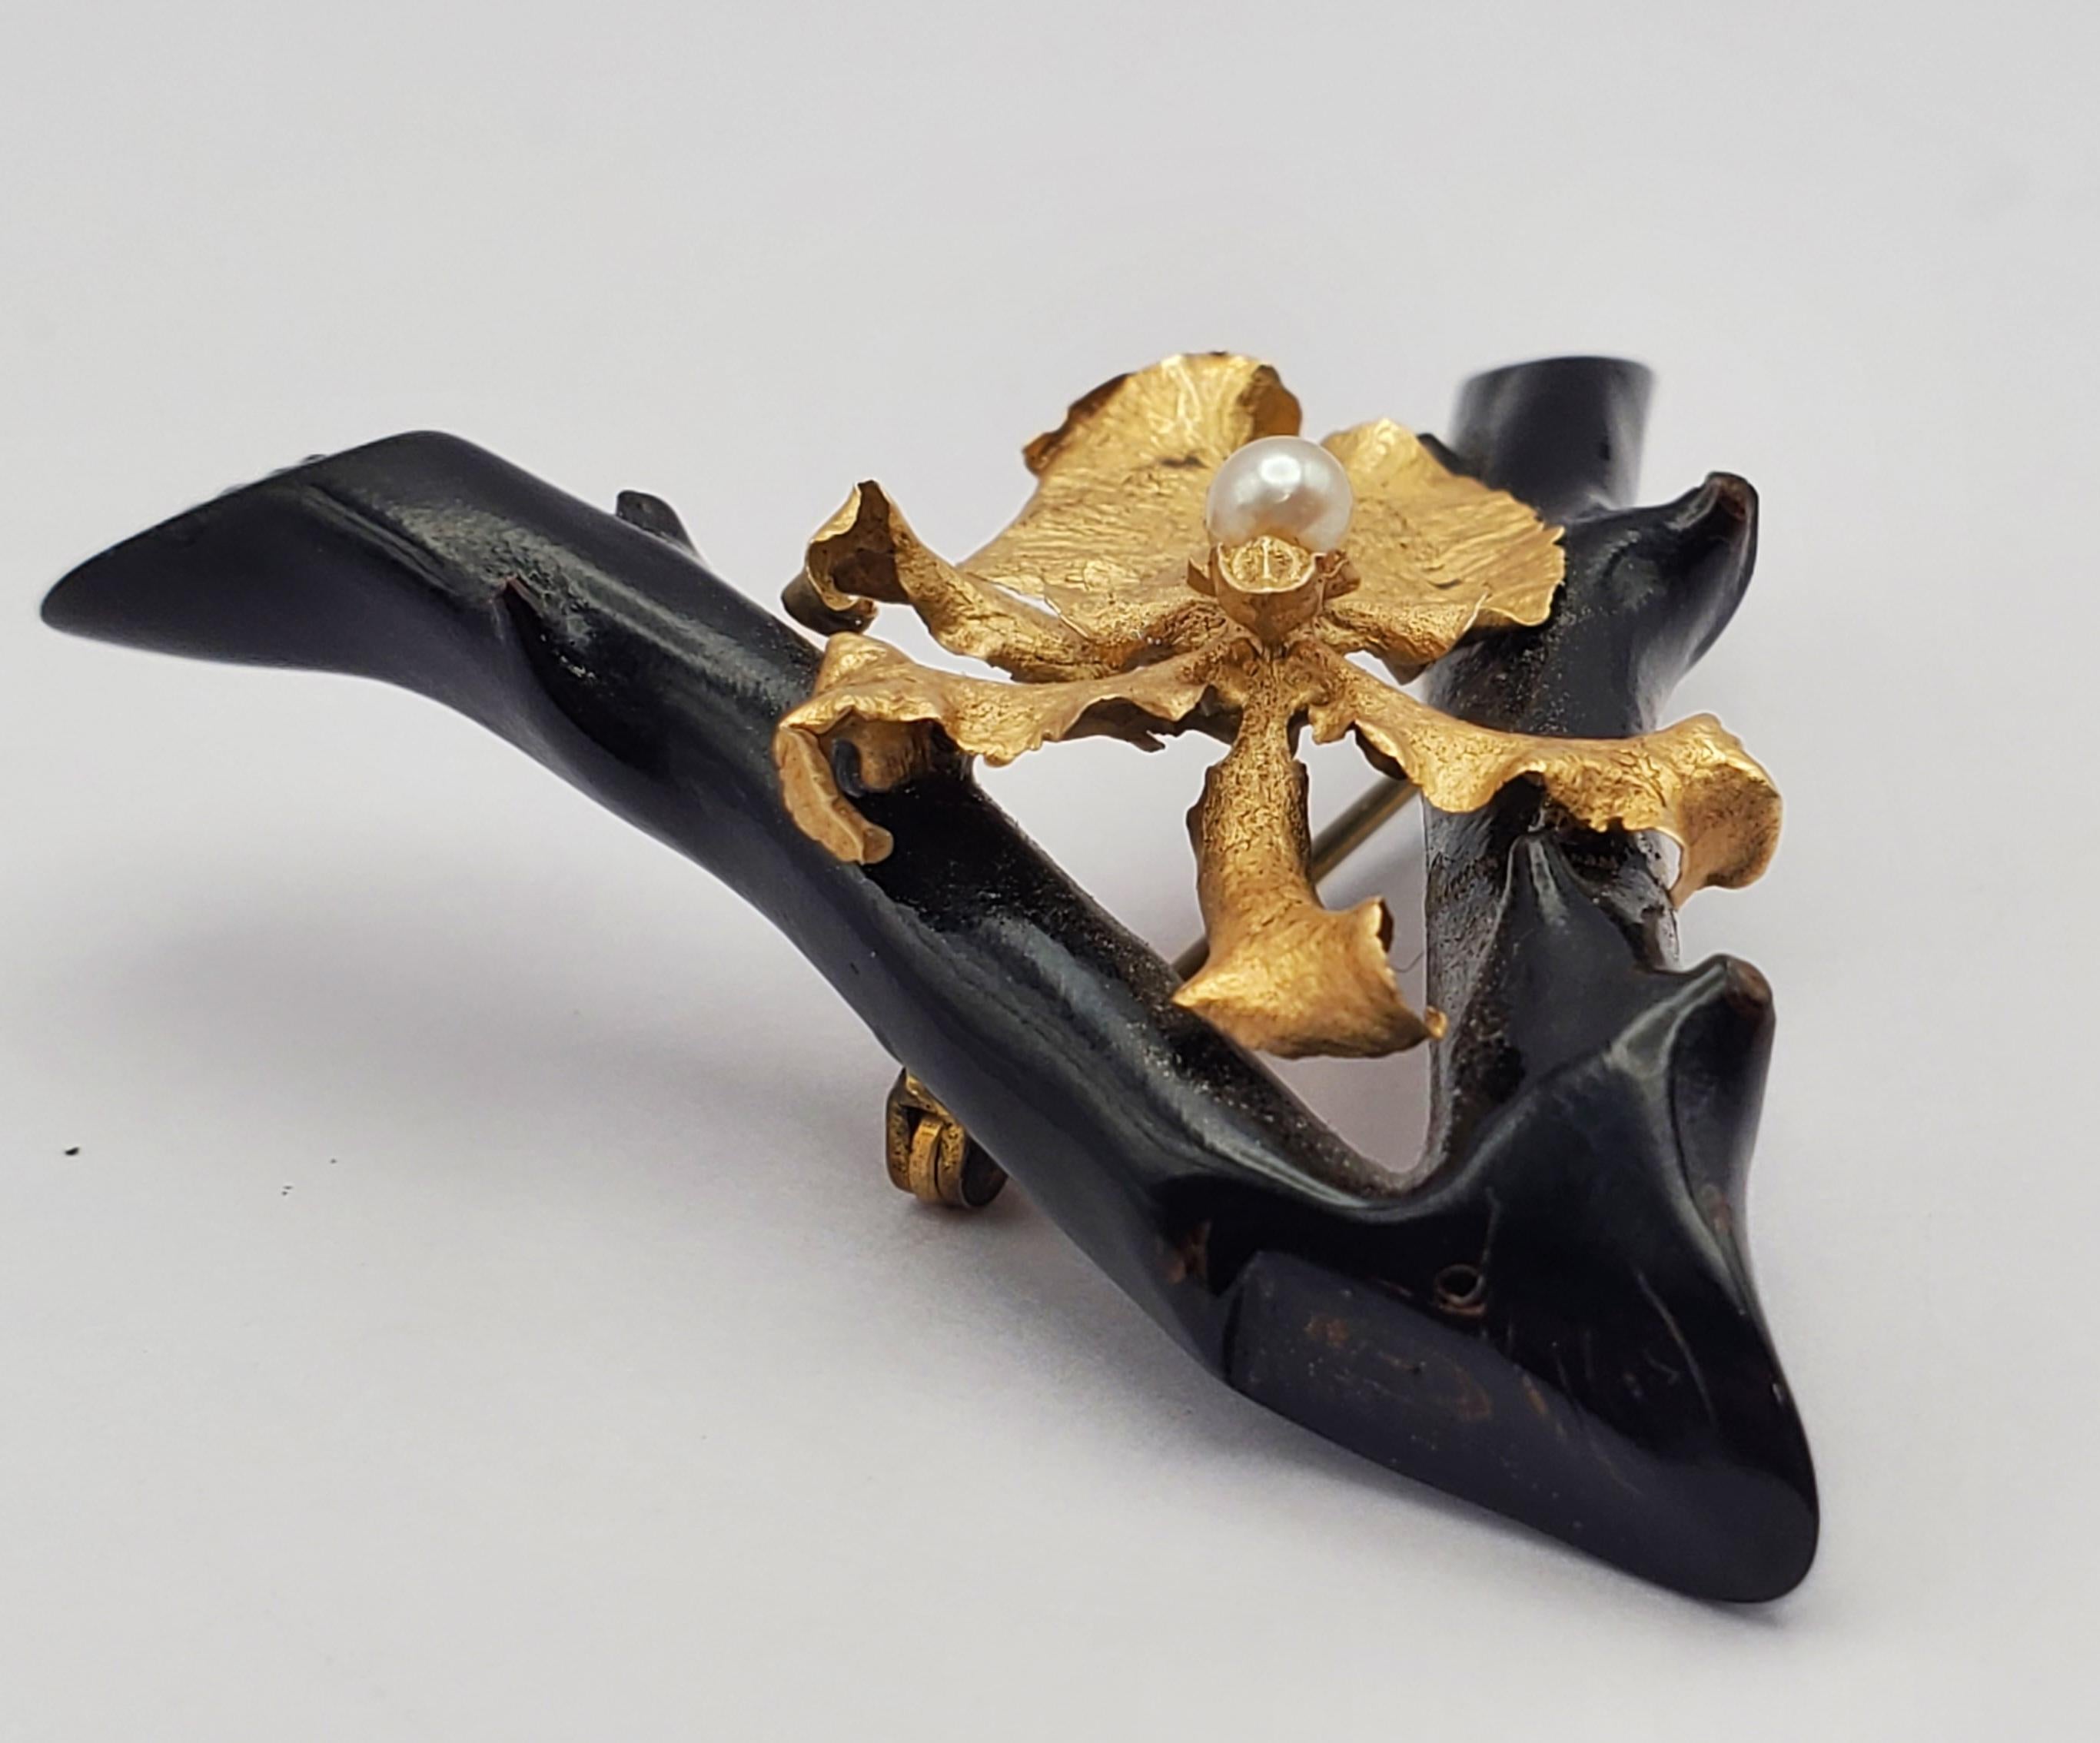 Wonderful rare vintage black coral and 14k yellow gold Iris flower brooch. The black coral branch pin features a wishbone shape overlaid with a beautifully detailed rendering of an Iris flower with a cream colored freshwater pearl in the center. The